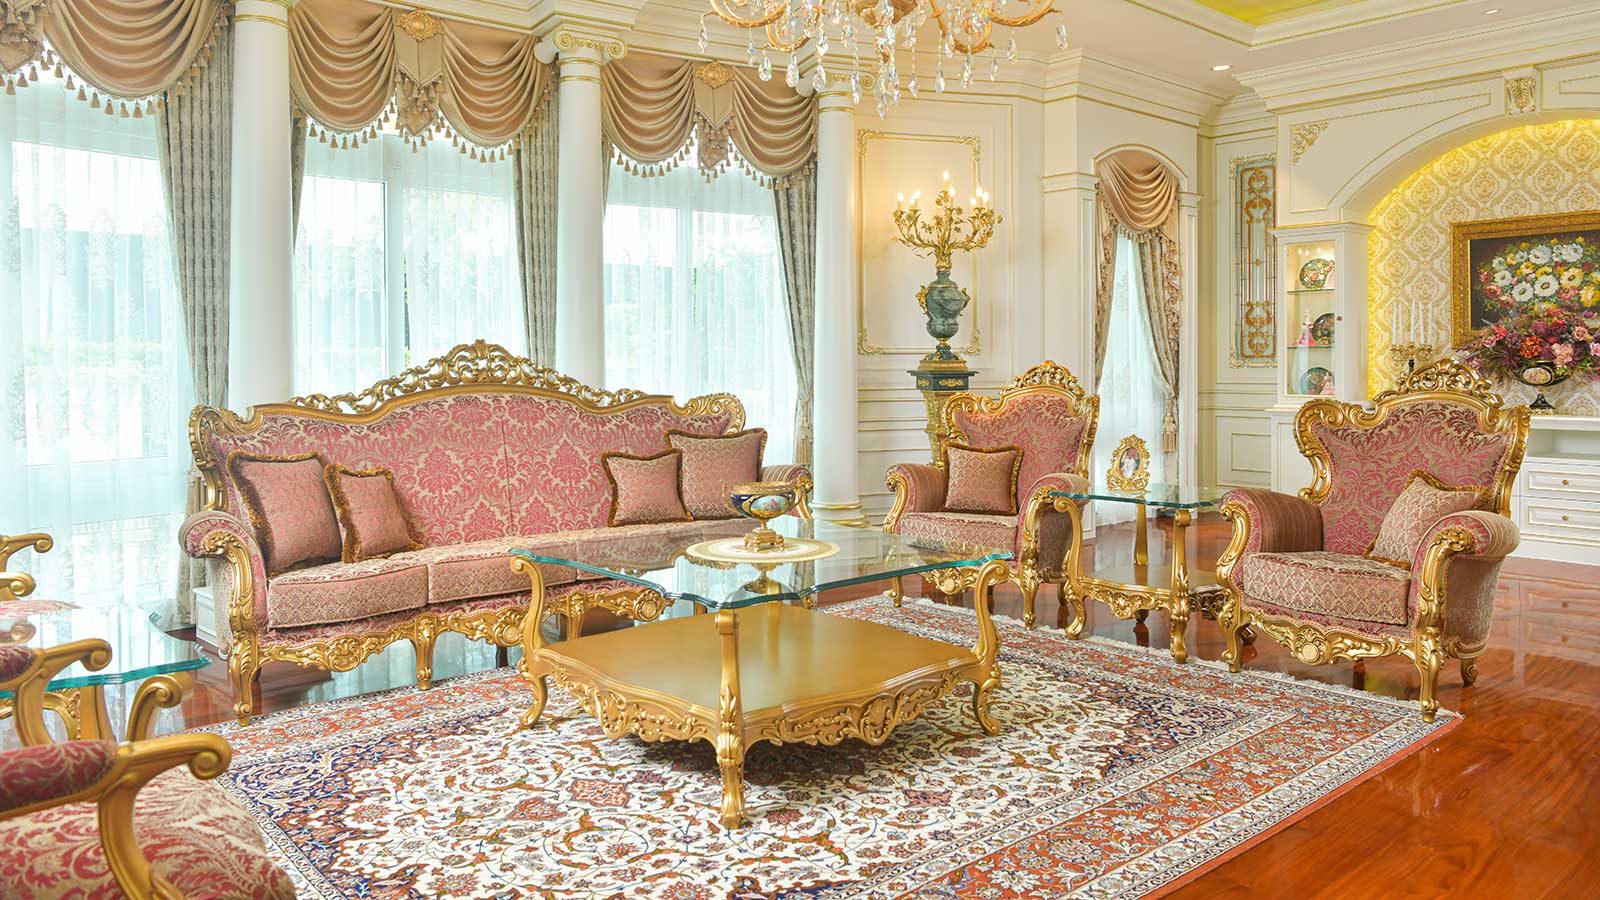 nothing Troubled Countryside Italian Living Room Furniture - Classic Luxury Living Room Furniture